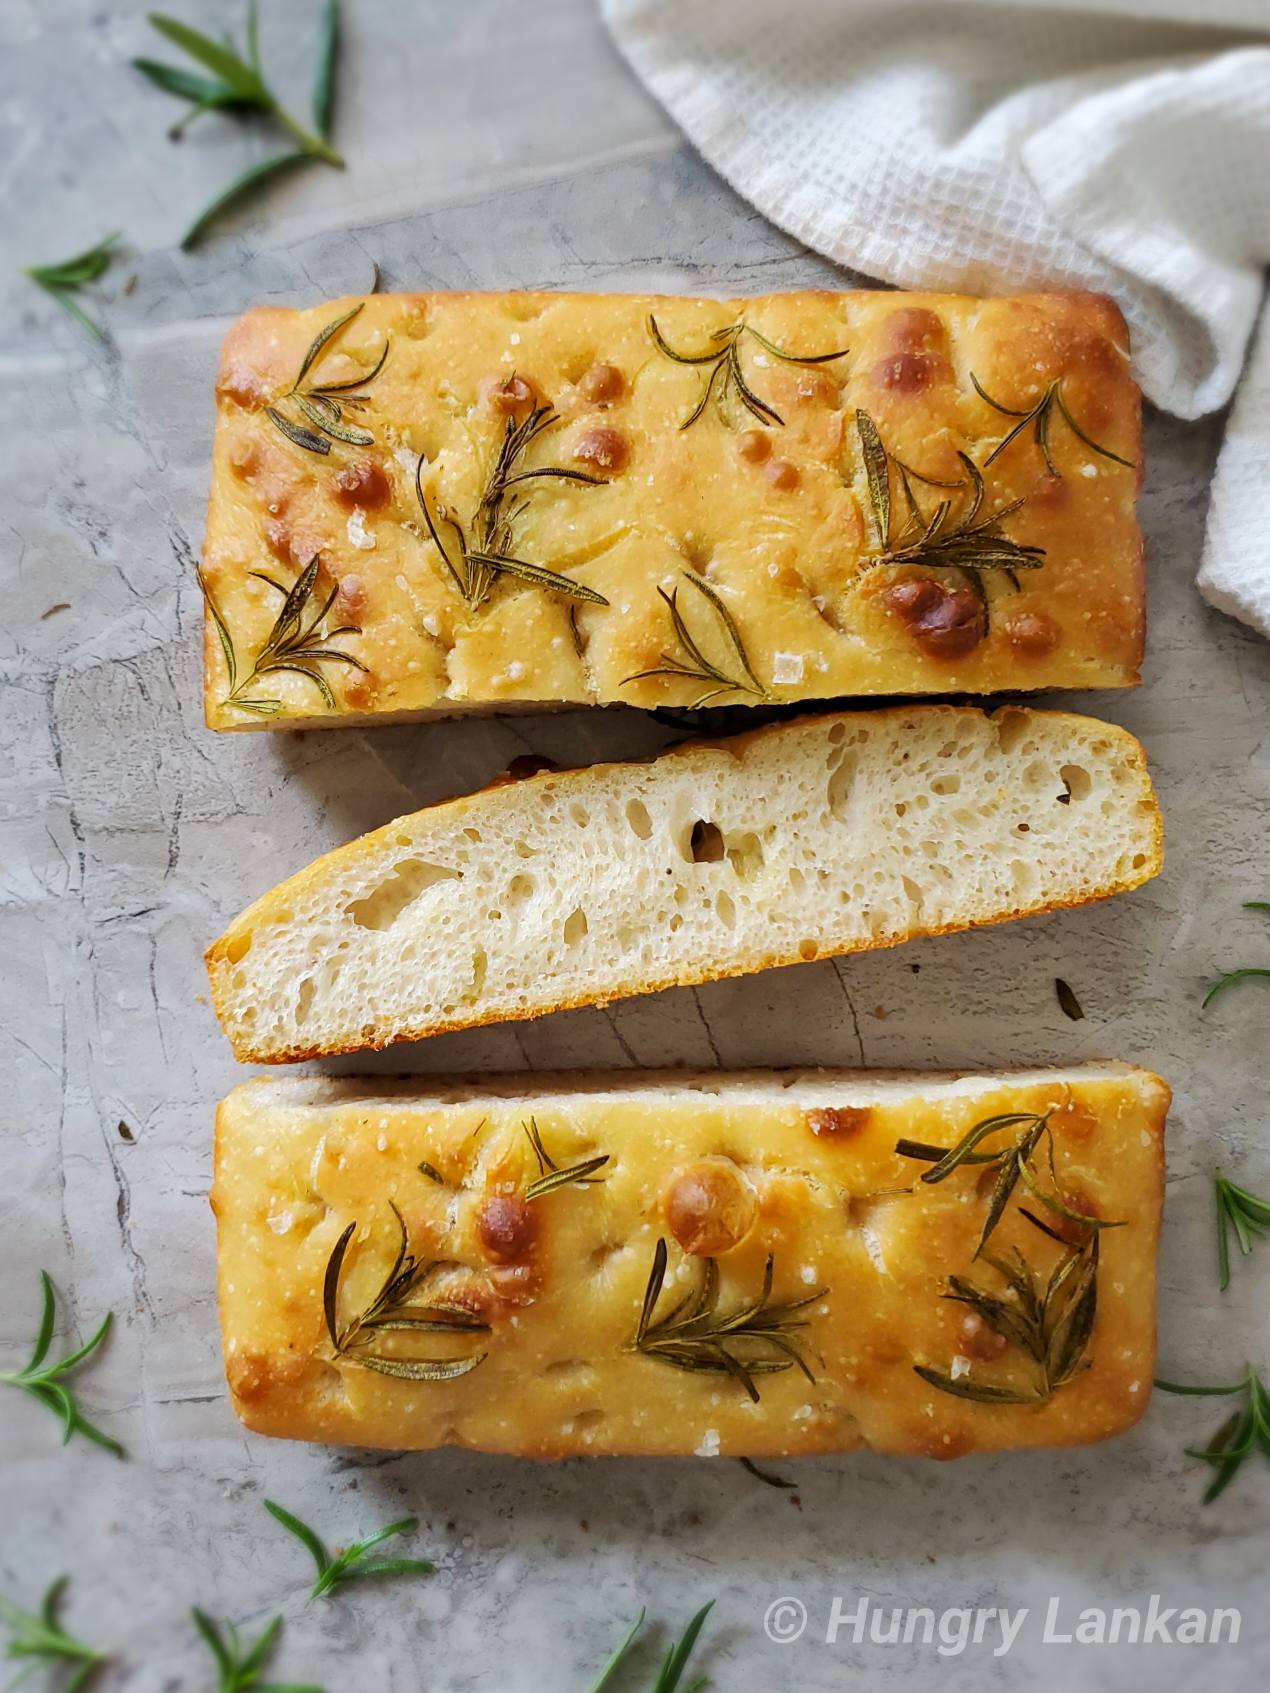 Sourdough Focaccia with rosemary and sea salt - Hungry Lankan